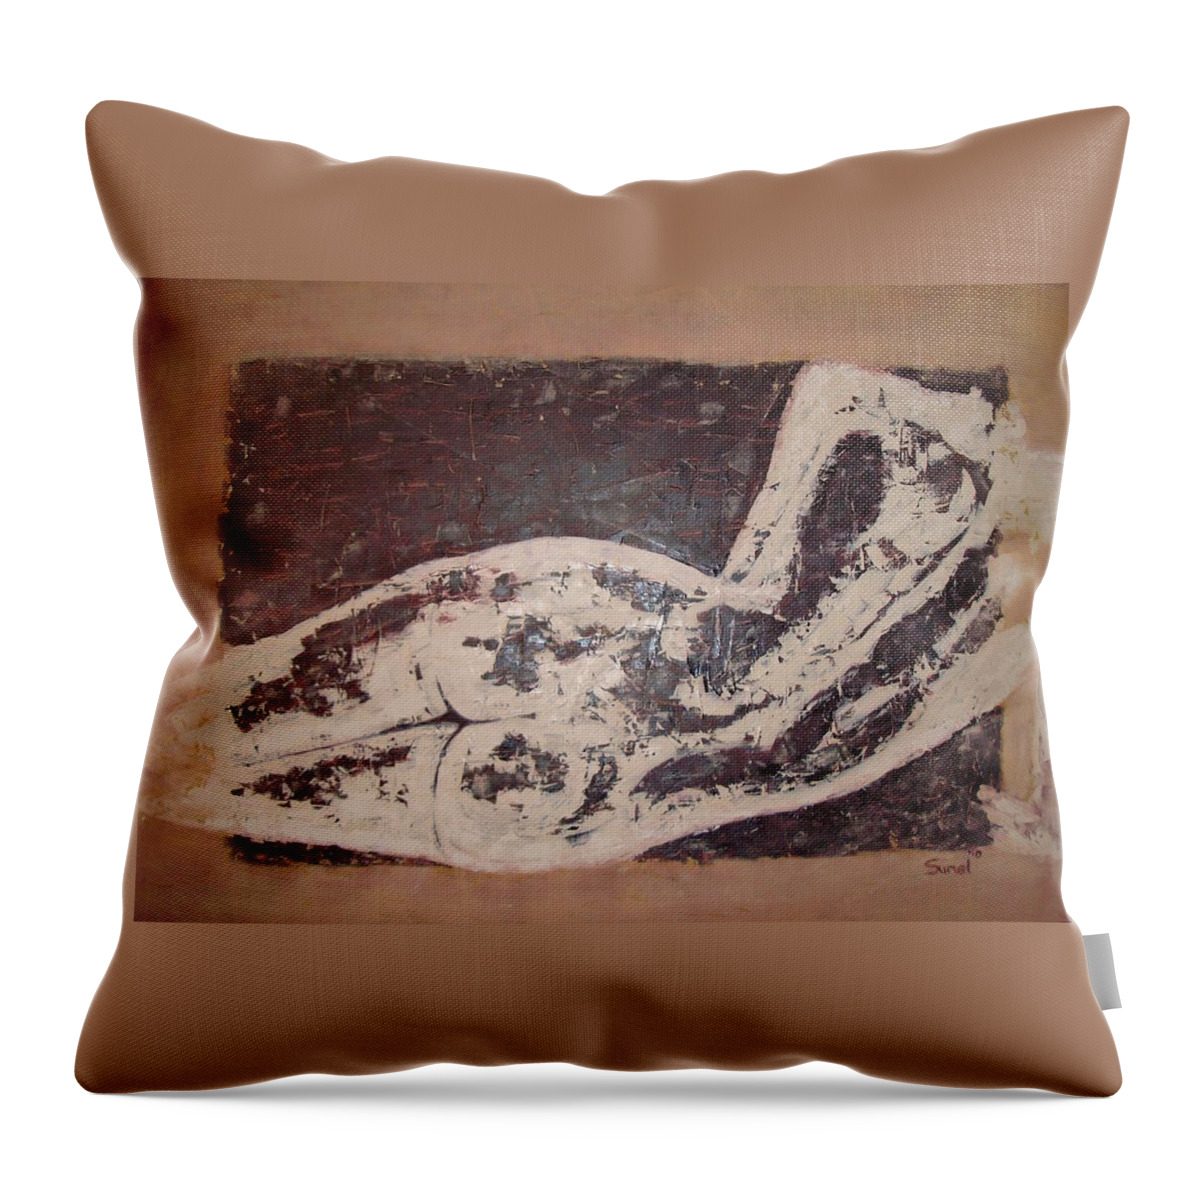 Nude Throw Pillow featuring the painting Sideways by Sunel De Lange